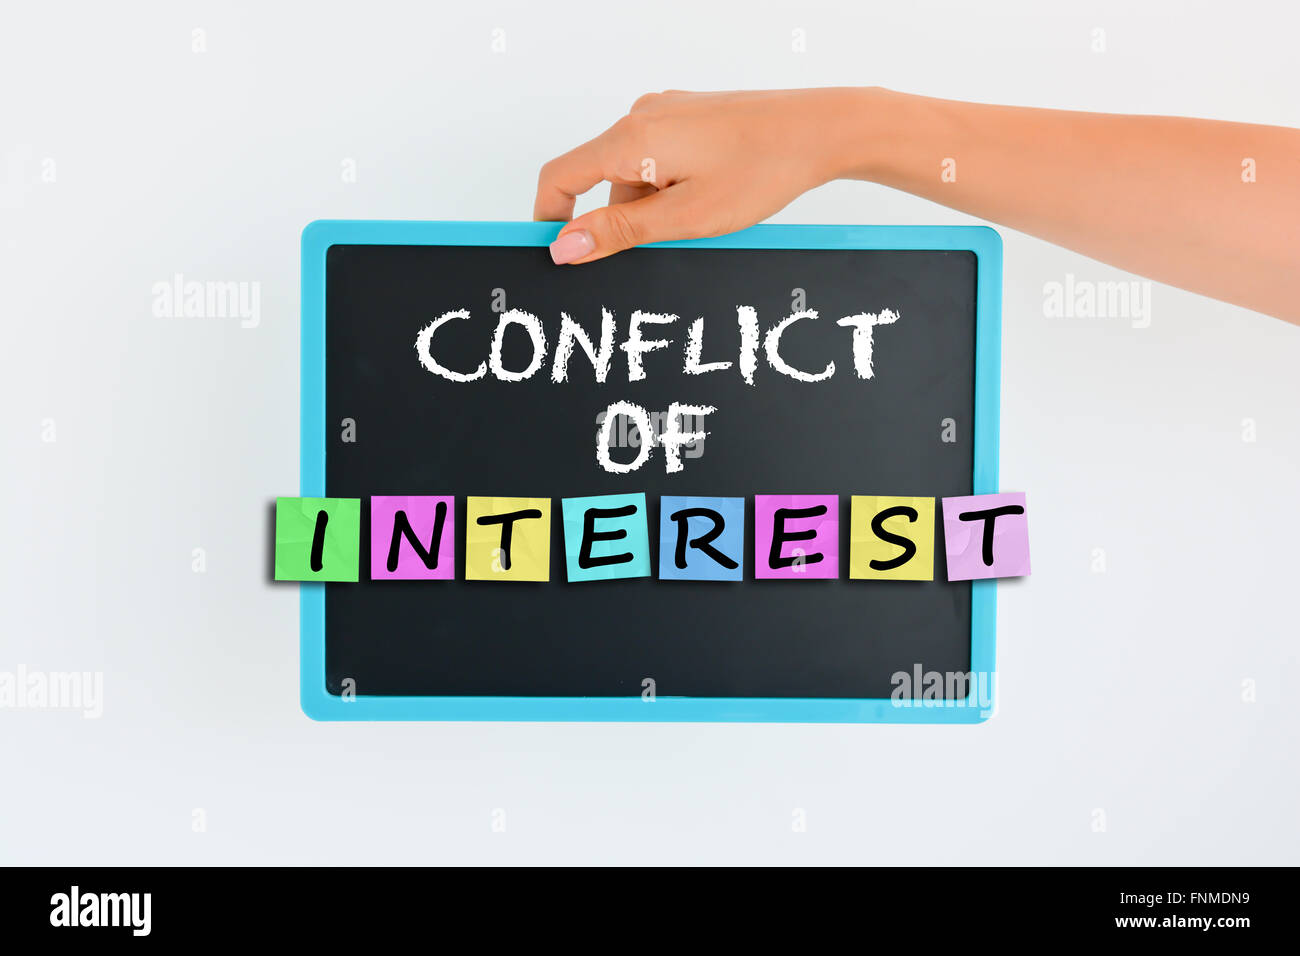 Conflict of interest concept on small blackboard Stock Photo